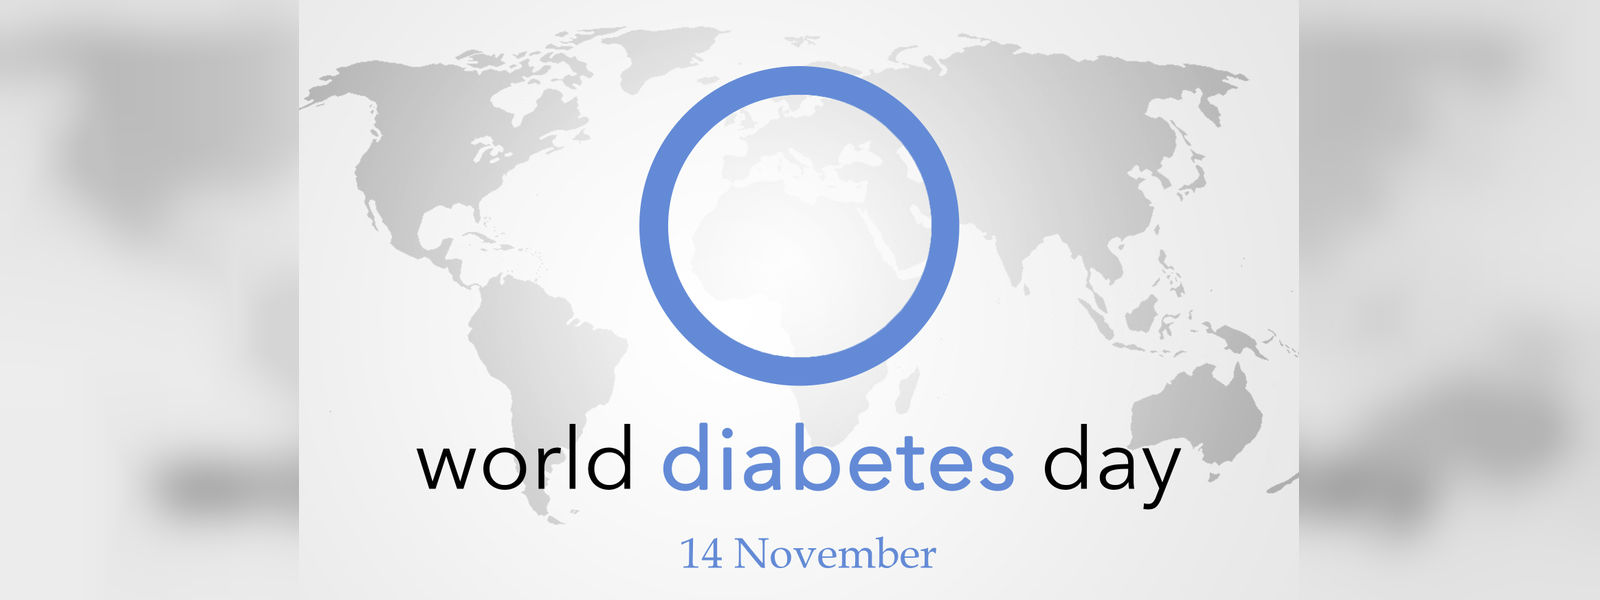 Today is World Diabetes Day 